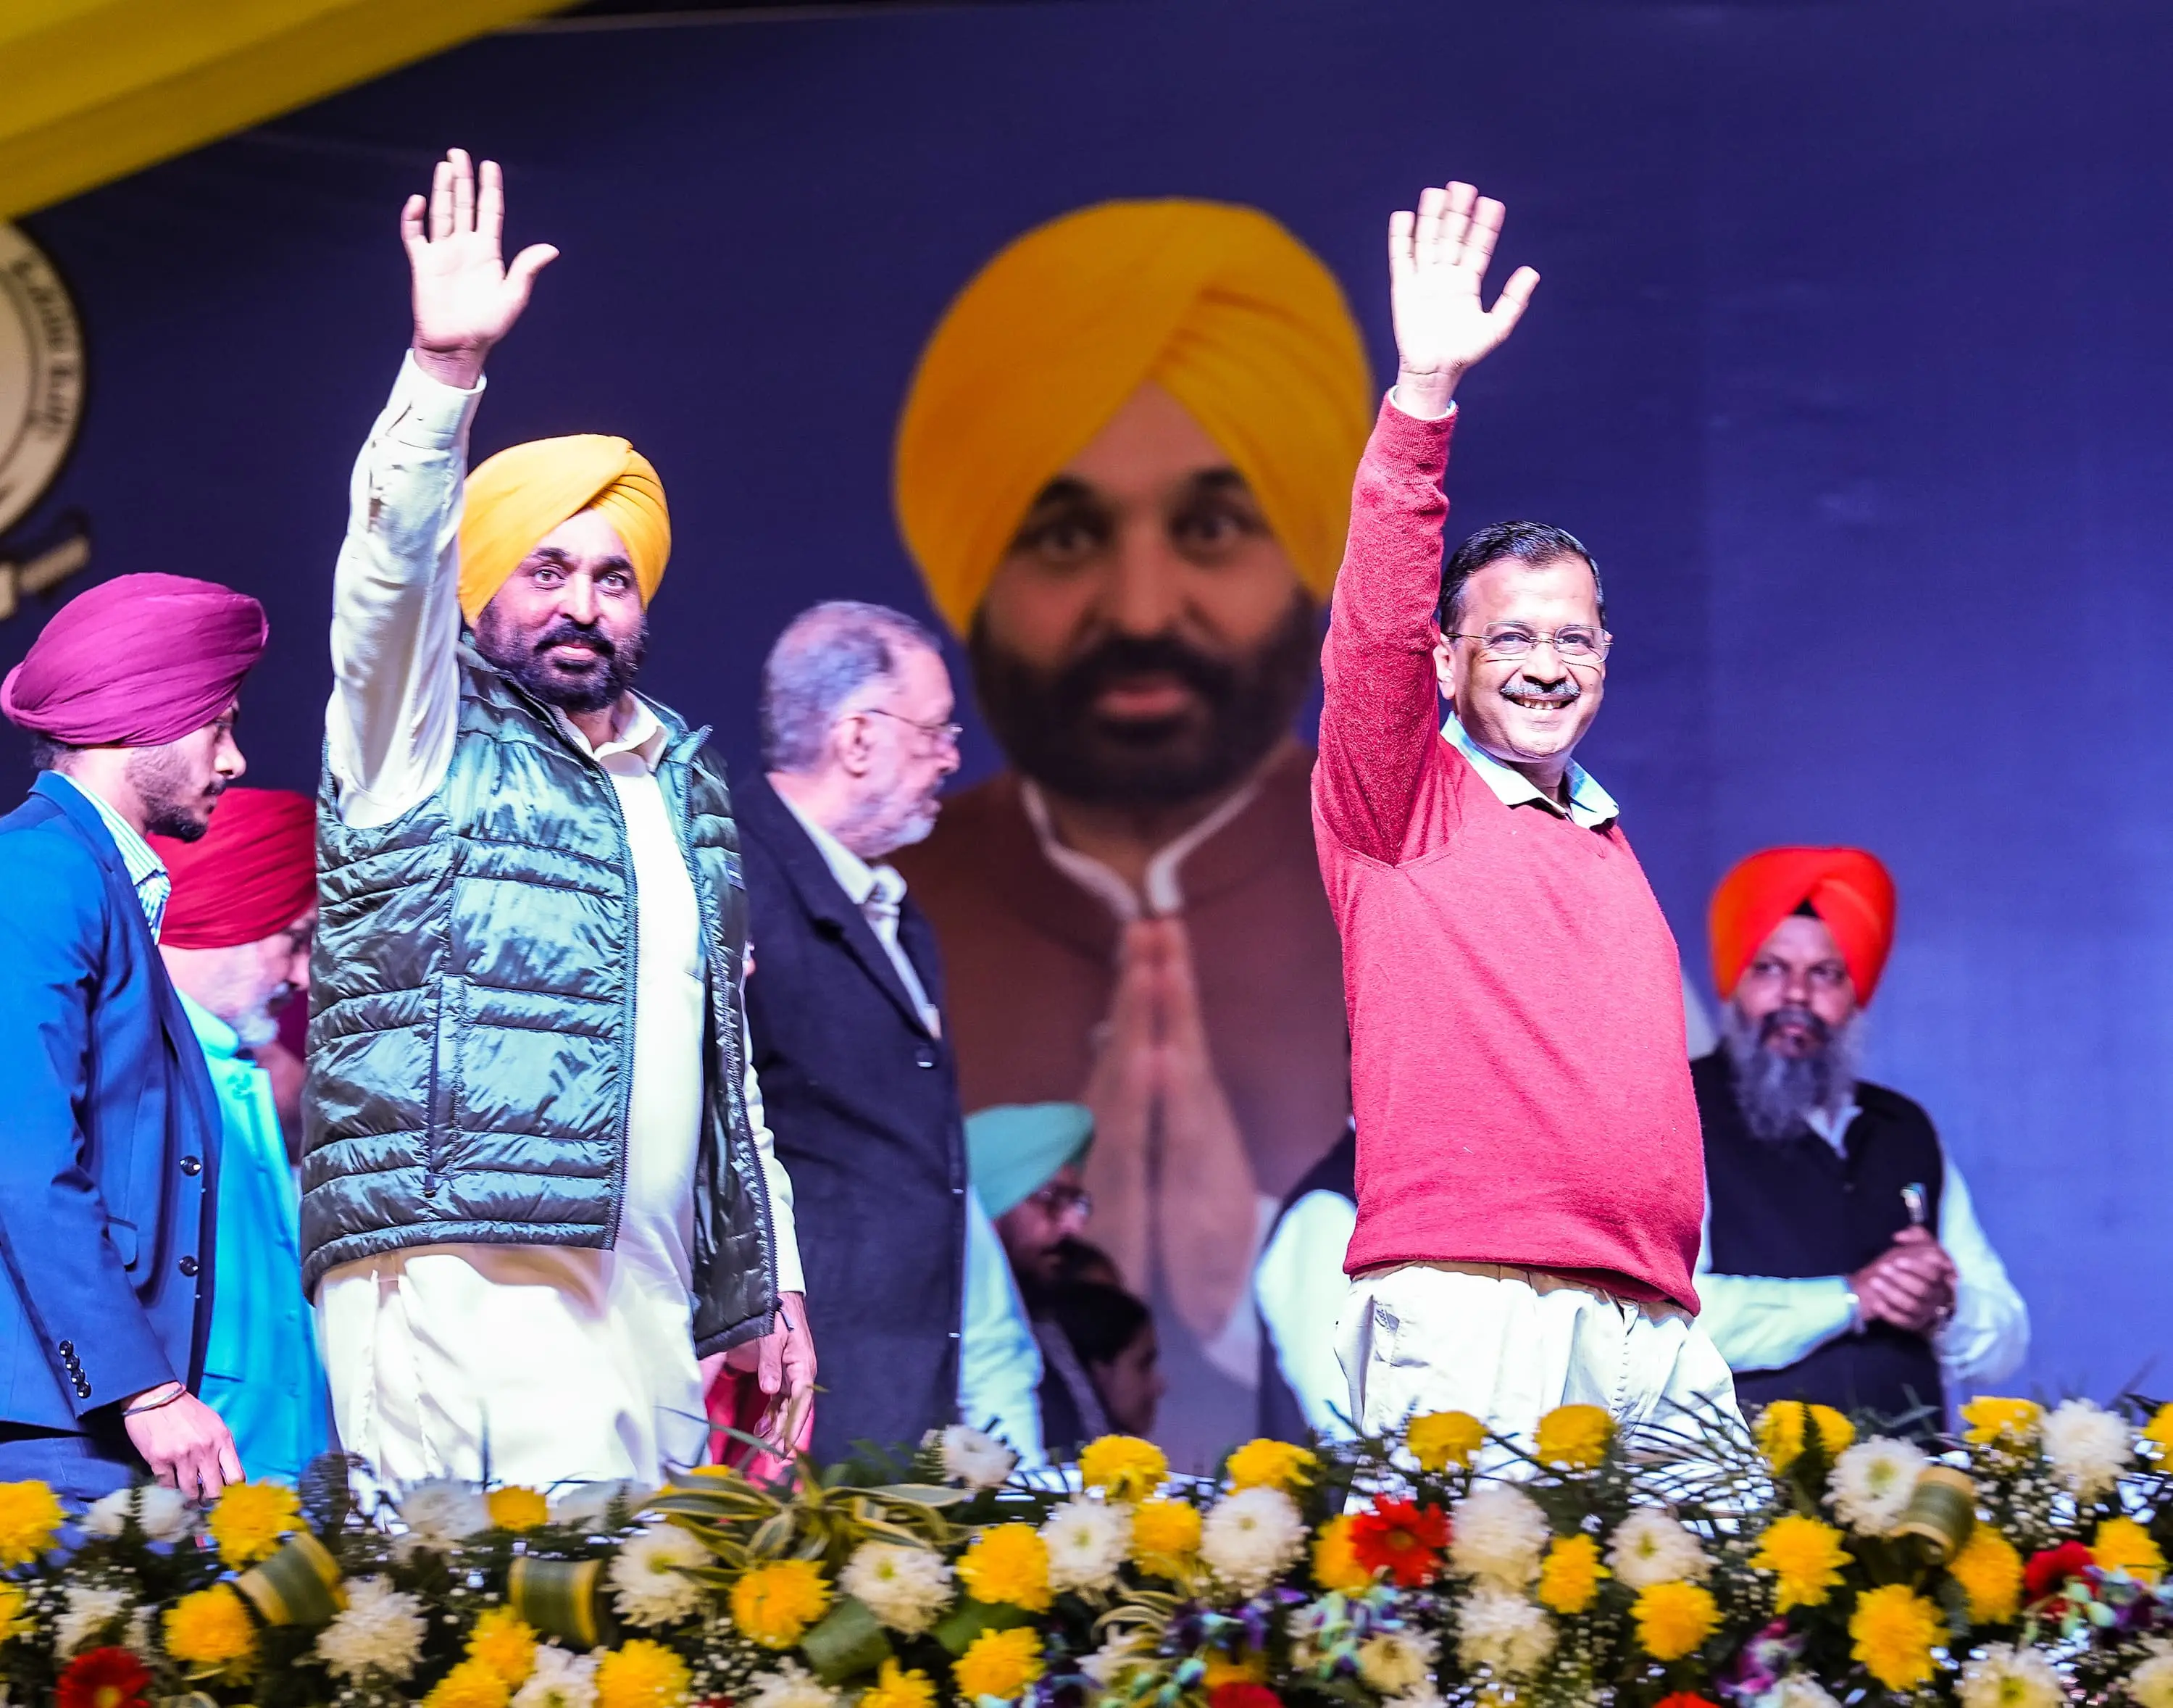 Bhagwant singh mann and arvind kejriwal envision that through ‘ghar ghar muft ration’ punjab will emerge as lighthouse for food security in country